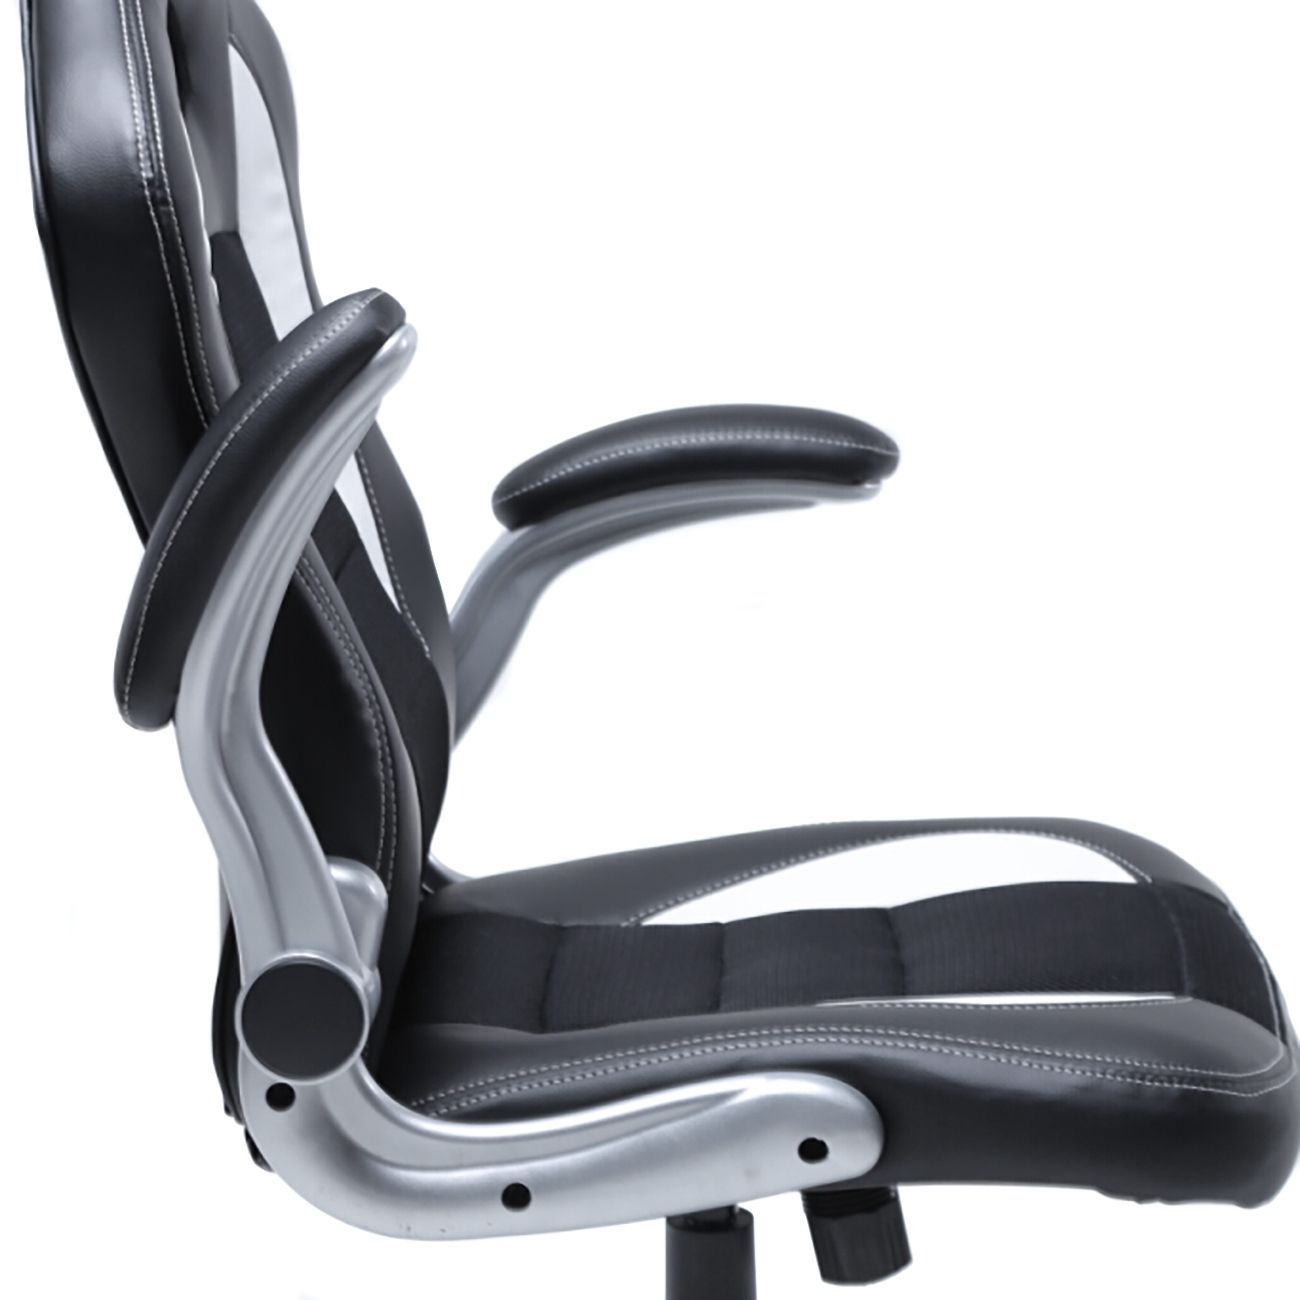 Office Chair Ergonomic Computer Pu Leather Desk Race Car Bucket Regarding Recent Executive Office Chairs With Flip Up Arms (View 2 of 20)